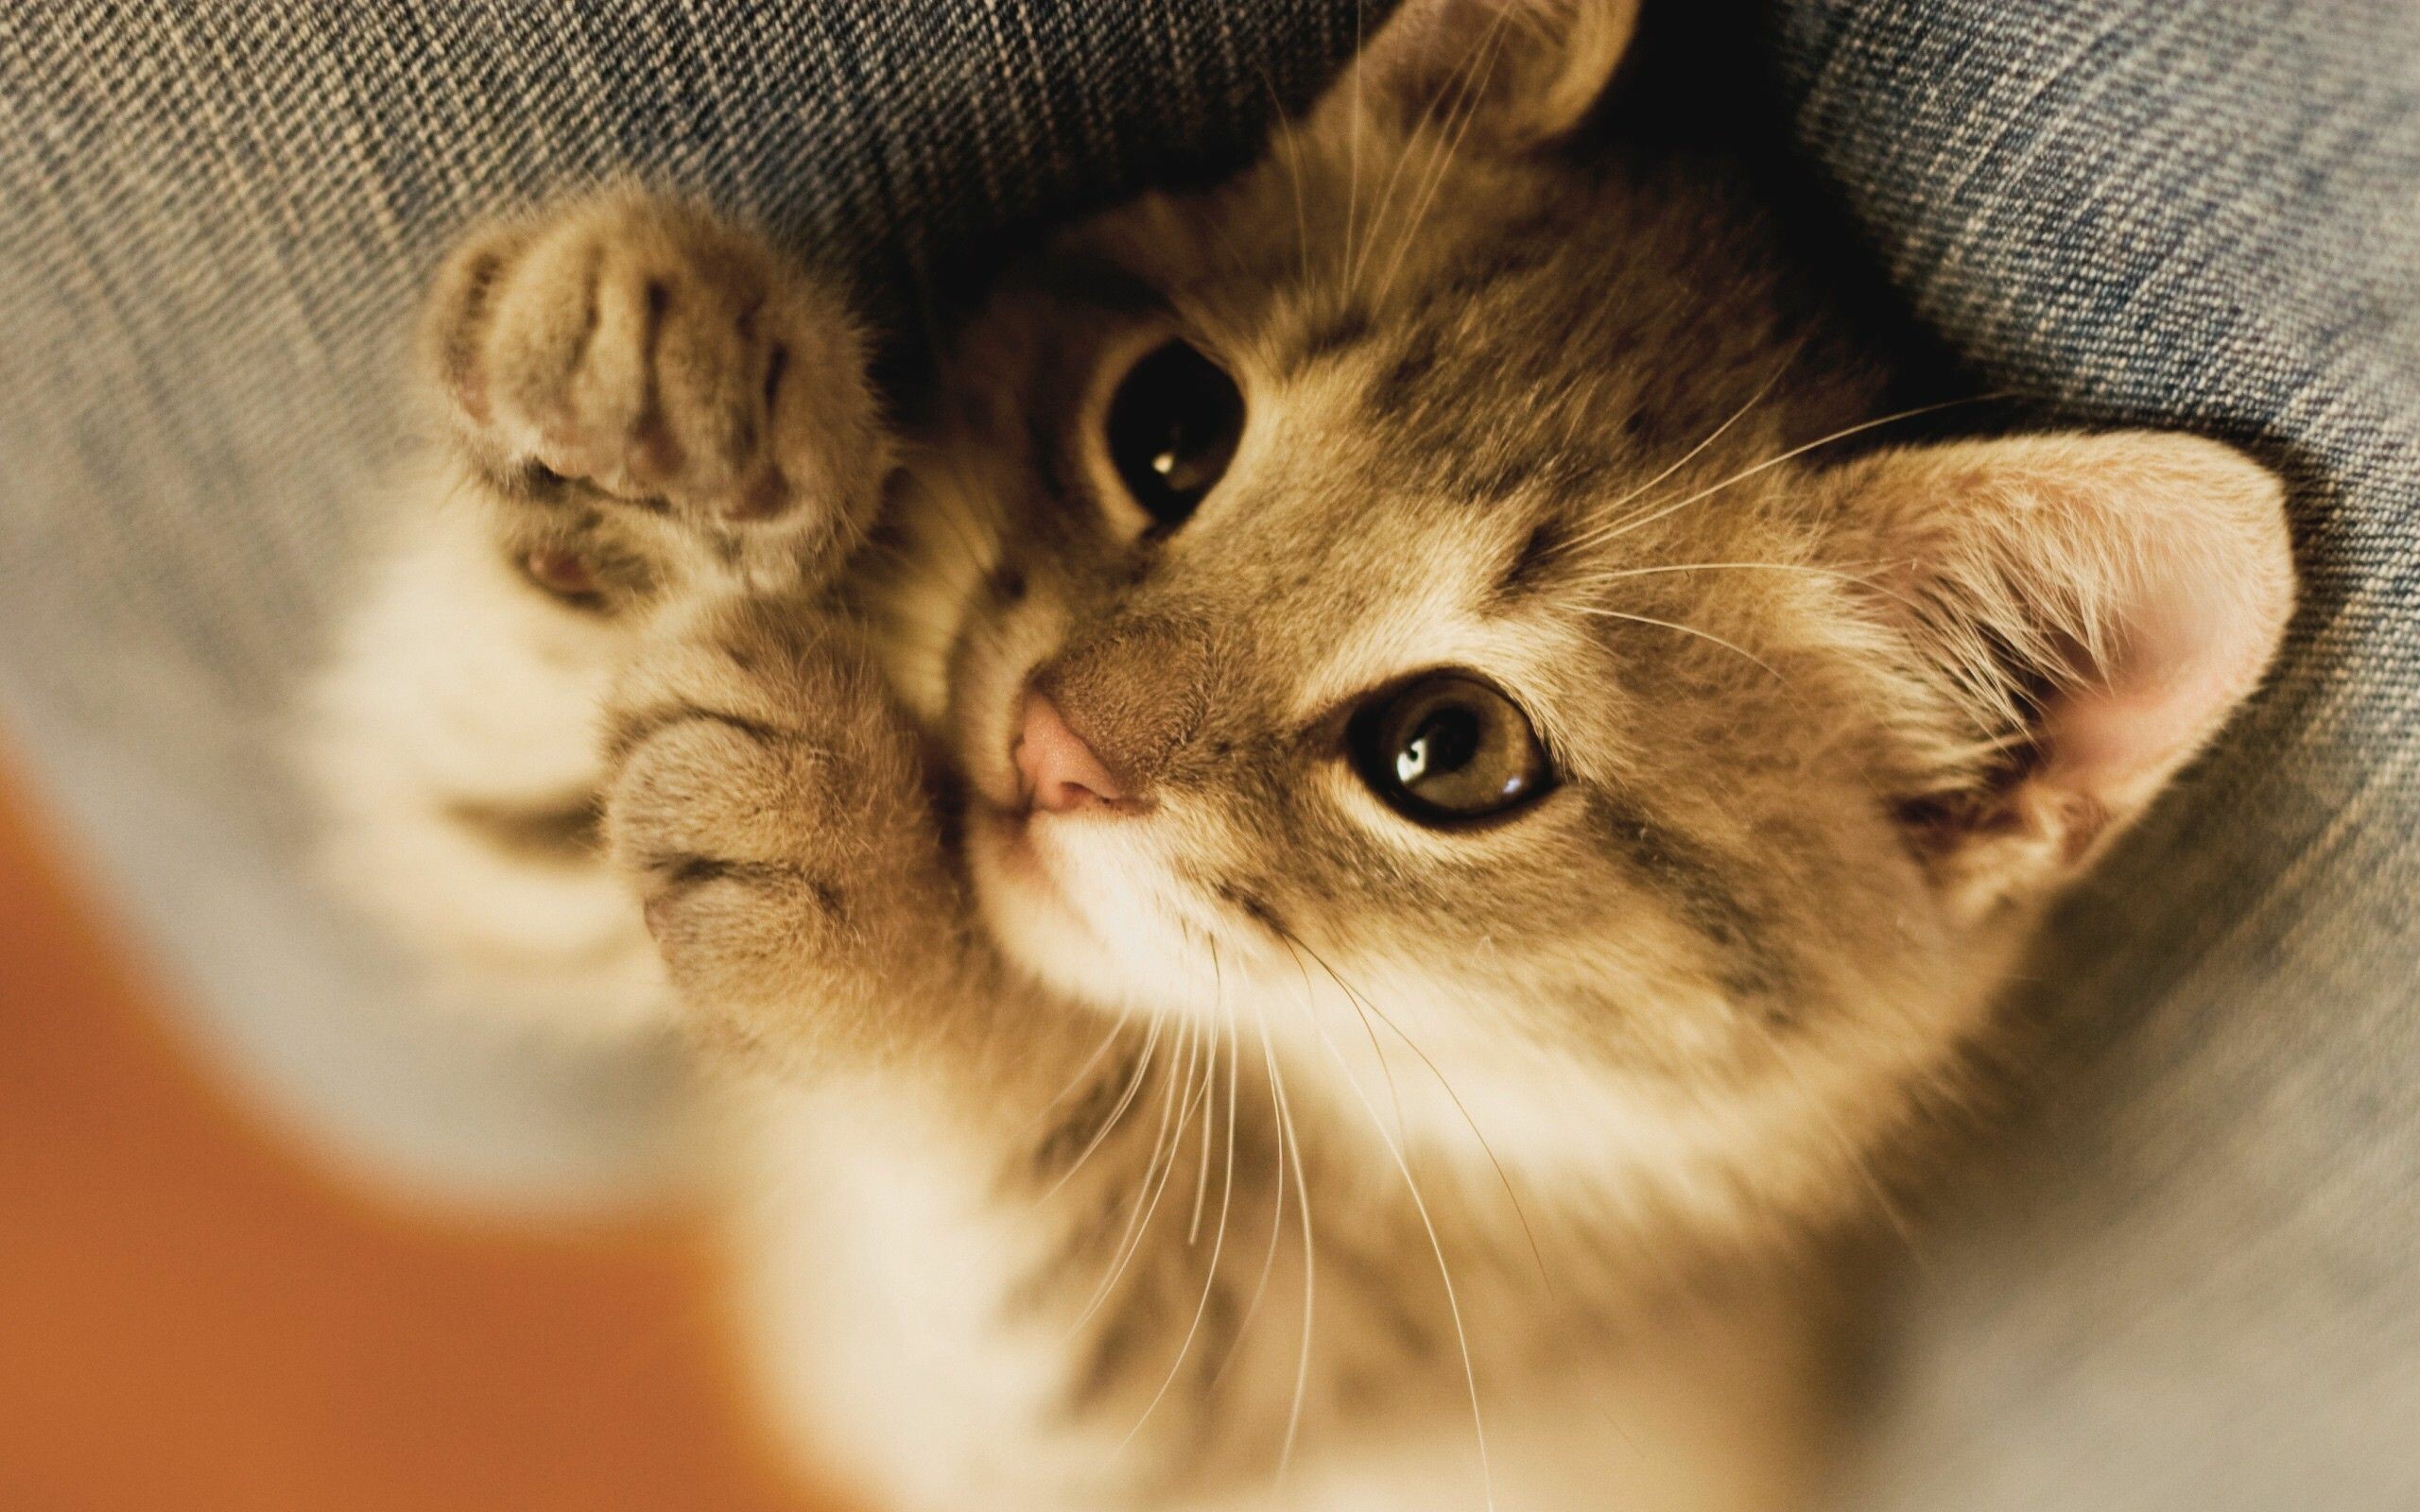 Kitten: Baby cat, commonly kept as house pets. 2560x1600 HD Wallpaper.